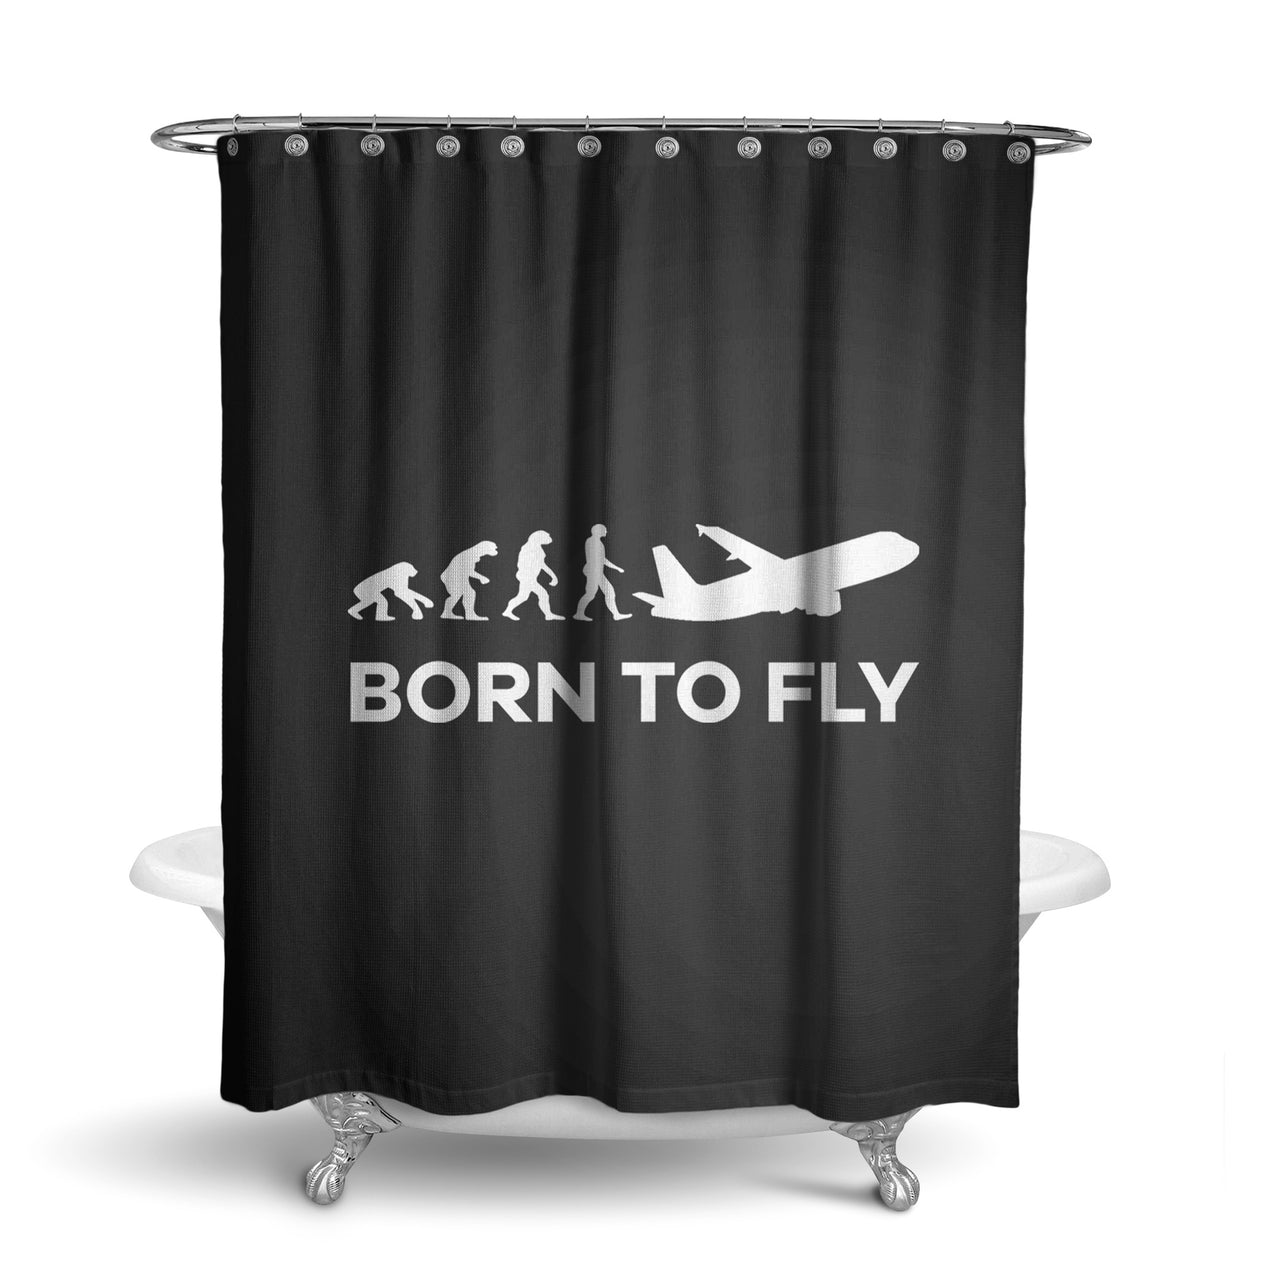 Born To Fly Designed Shower Curtains